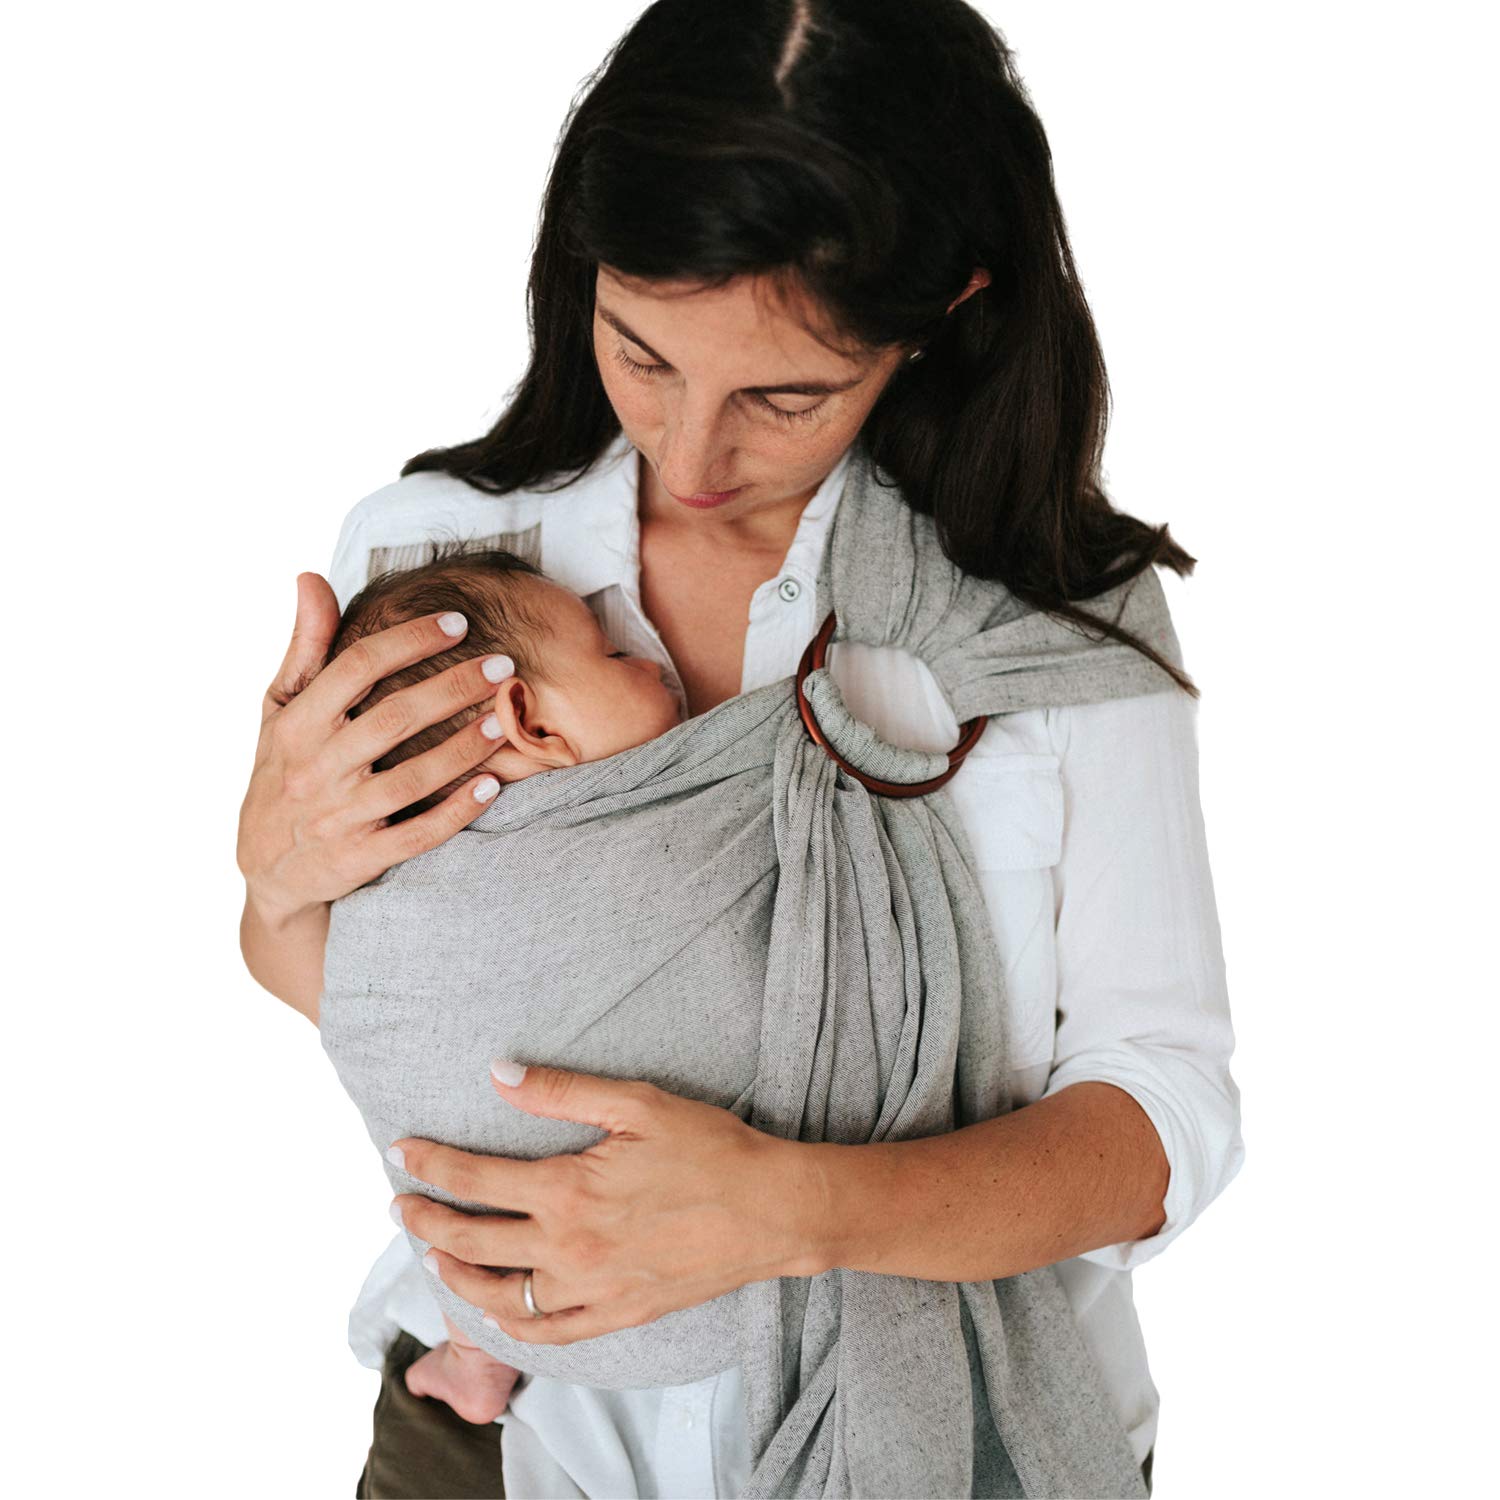 Nalakai Luxury Baby Sling with Rings Extra Soft Bamboo and Linen Fabric Full Support and Comfort for Newborns, Infants and Toddlers Ideal Gift for Baby Shower - Men